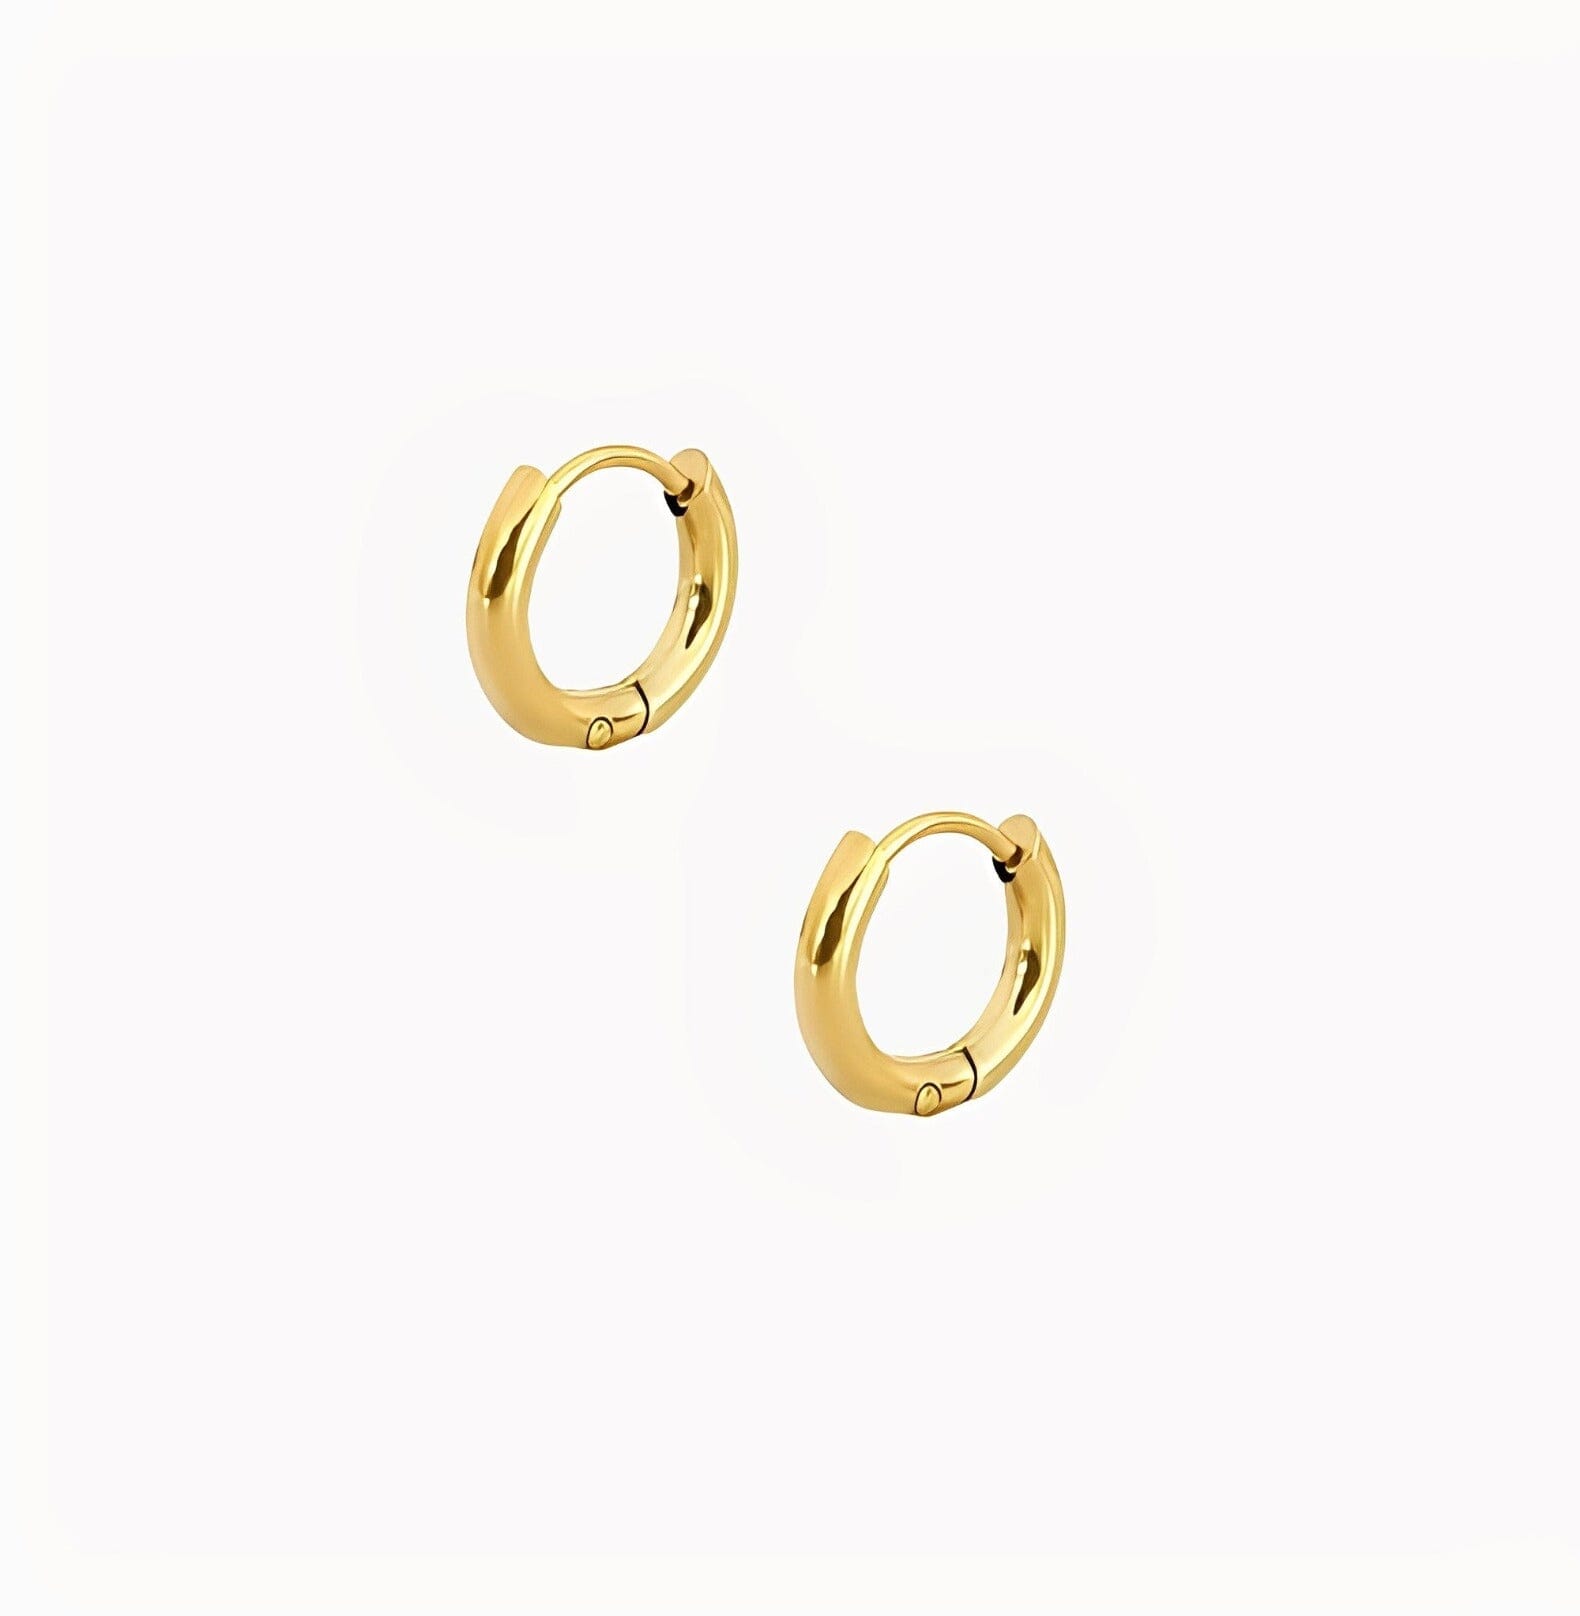 HOOP EARRINGS - GOLD earing Yubama Jewelry Online Store - The Elegant Designs of Gold and Silver ! 10mm 